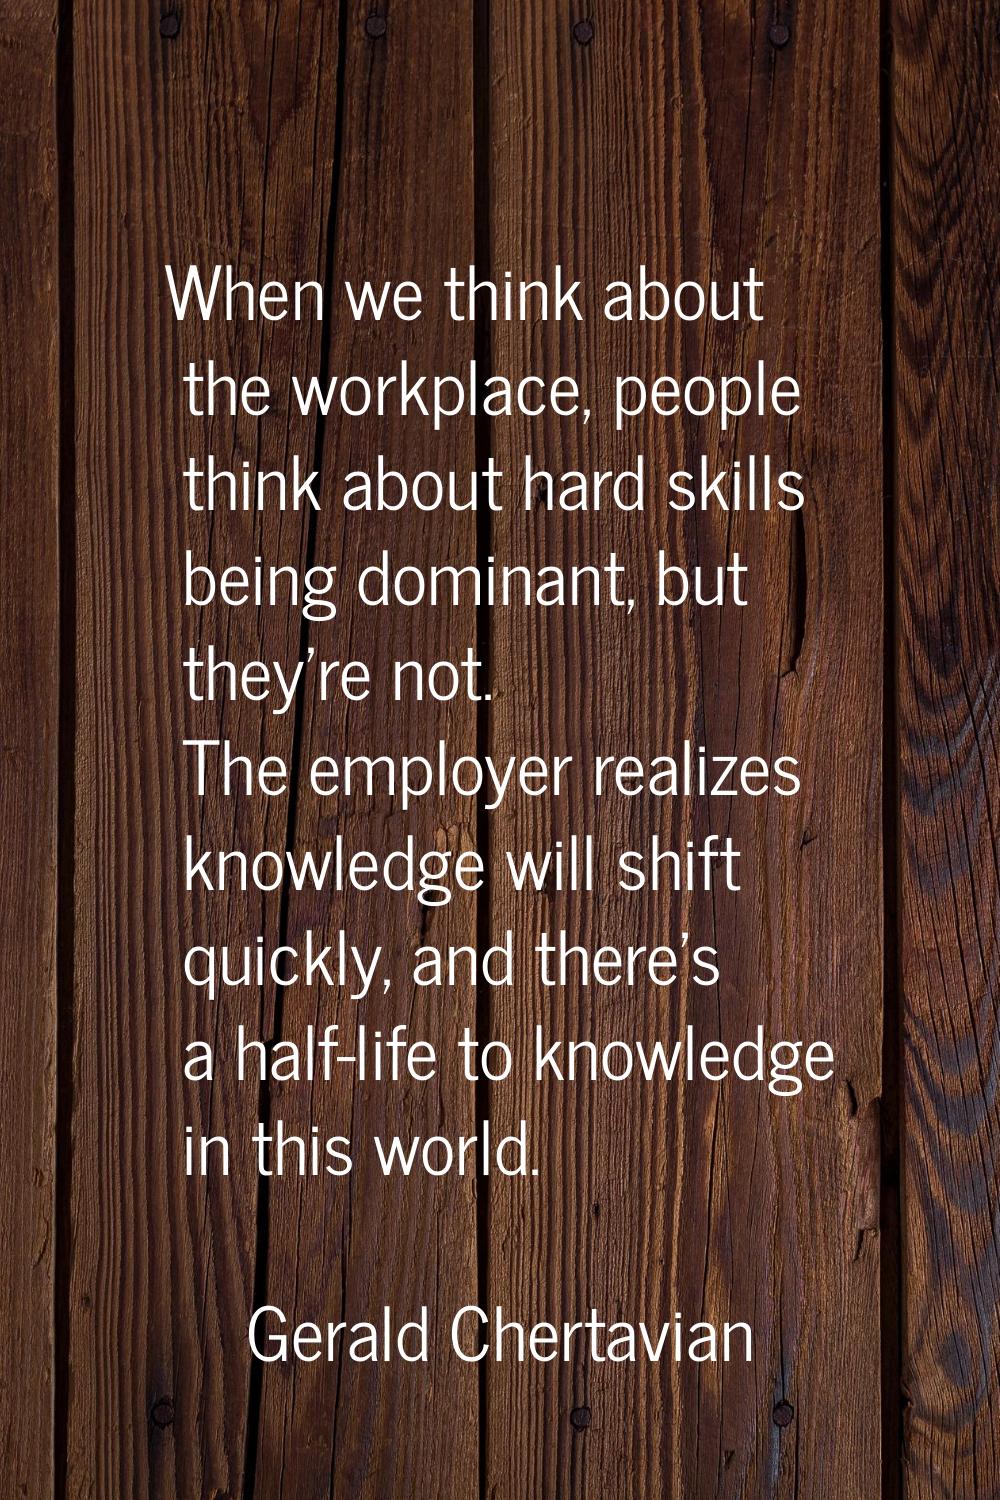 When we think about the workplace, people think about hard skills being dominant, but they're not. 